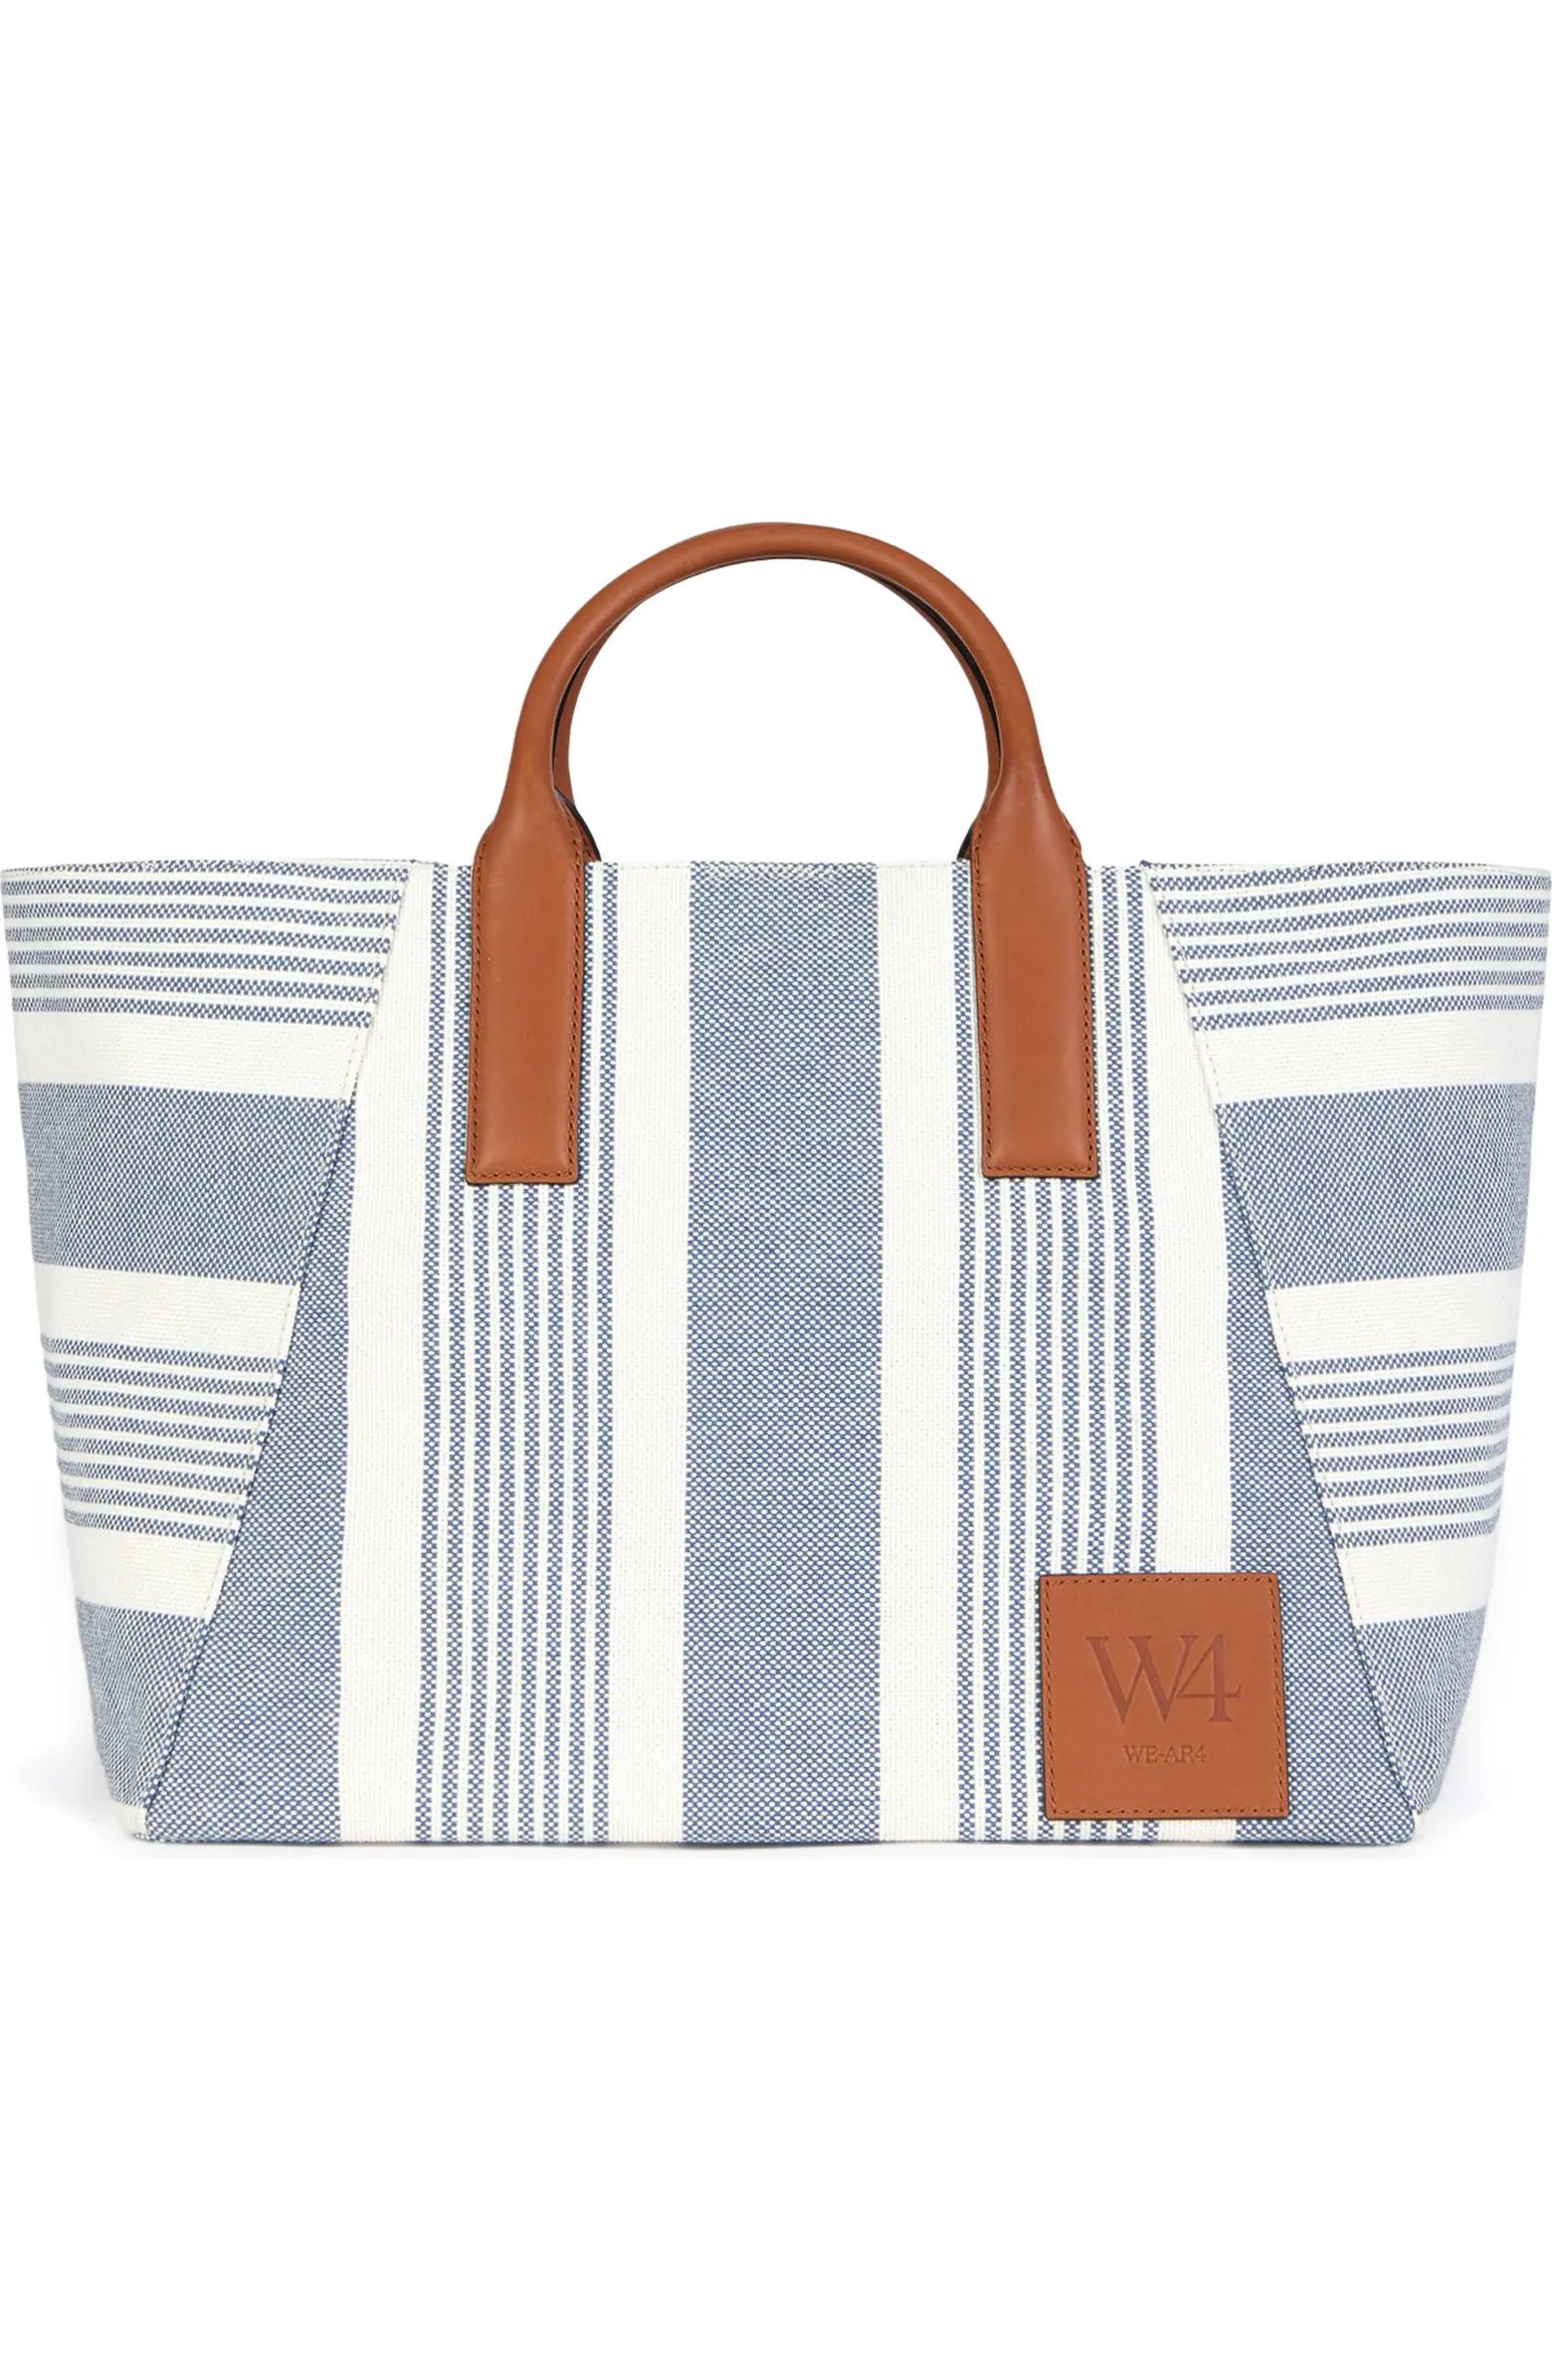 WE-AR4 The Riviera Tote | Nordstrom | Nordstrom